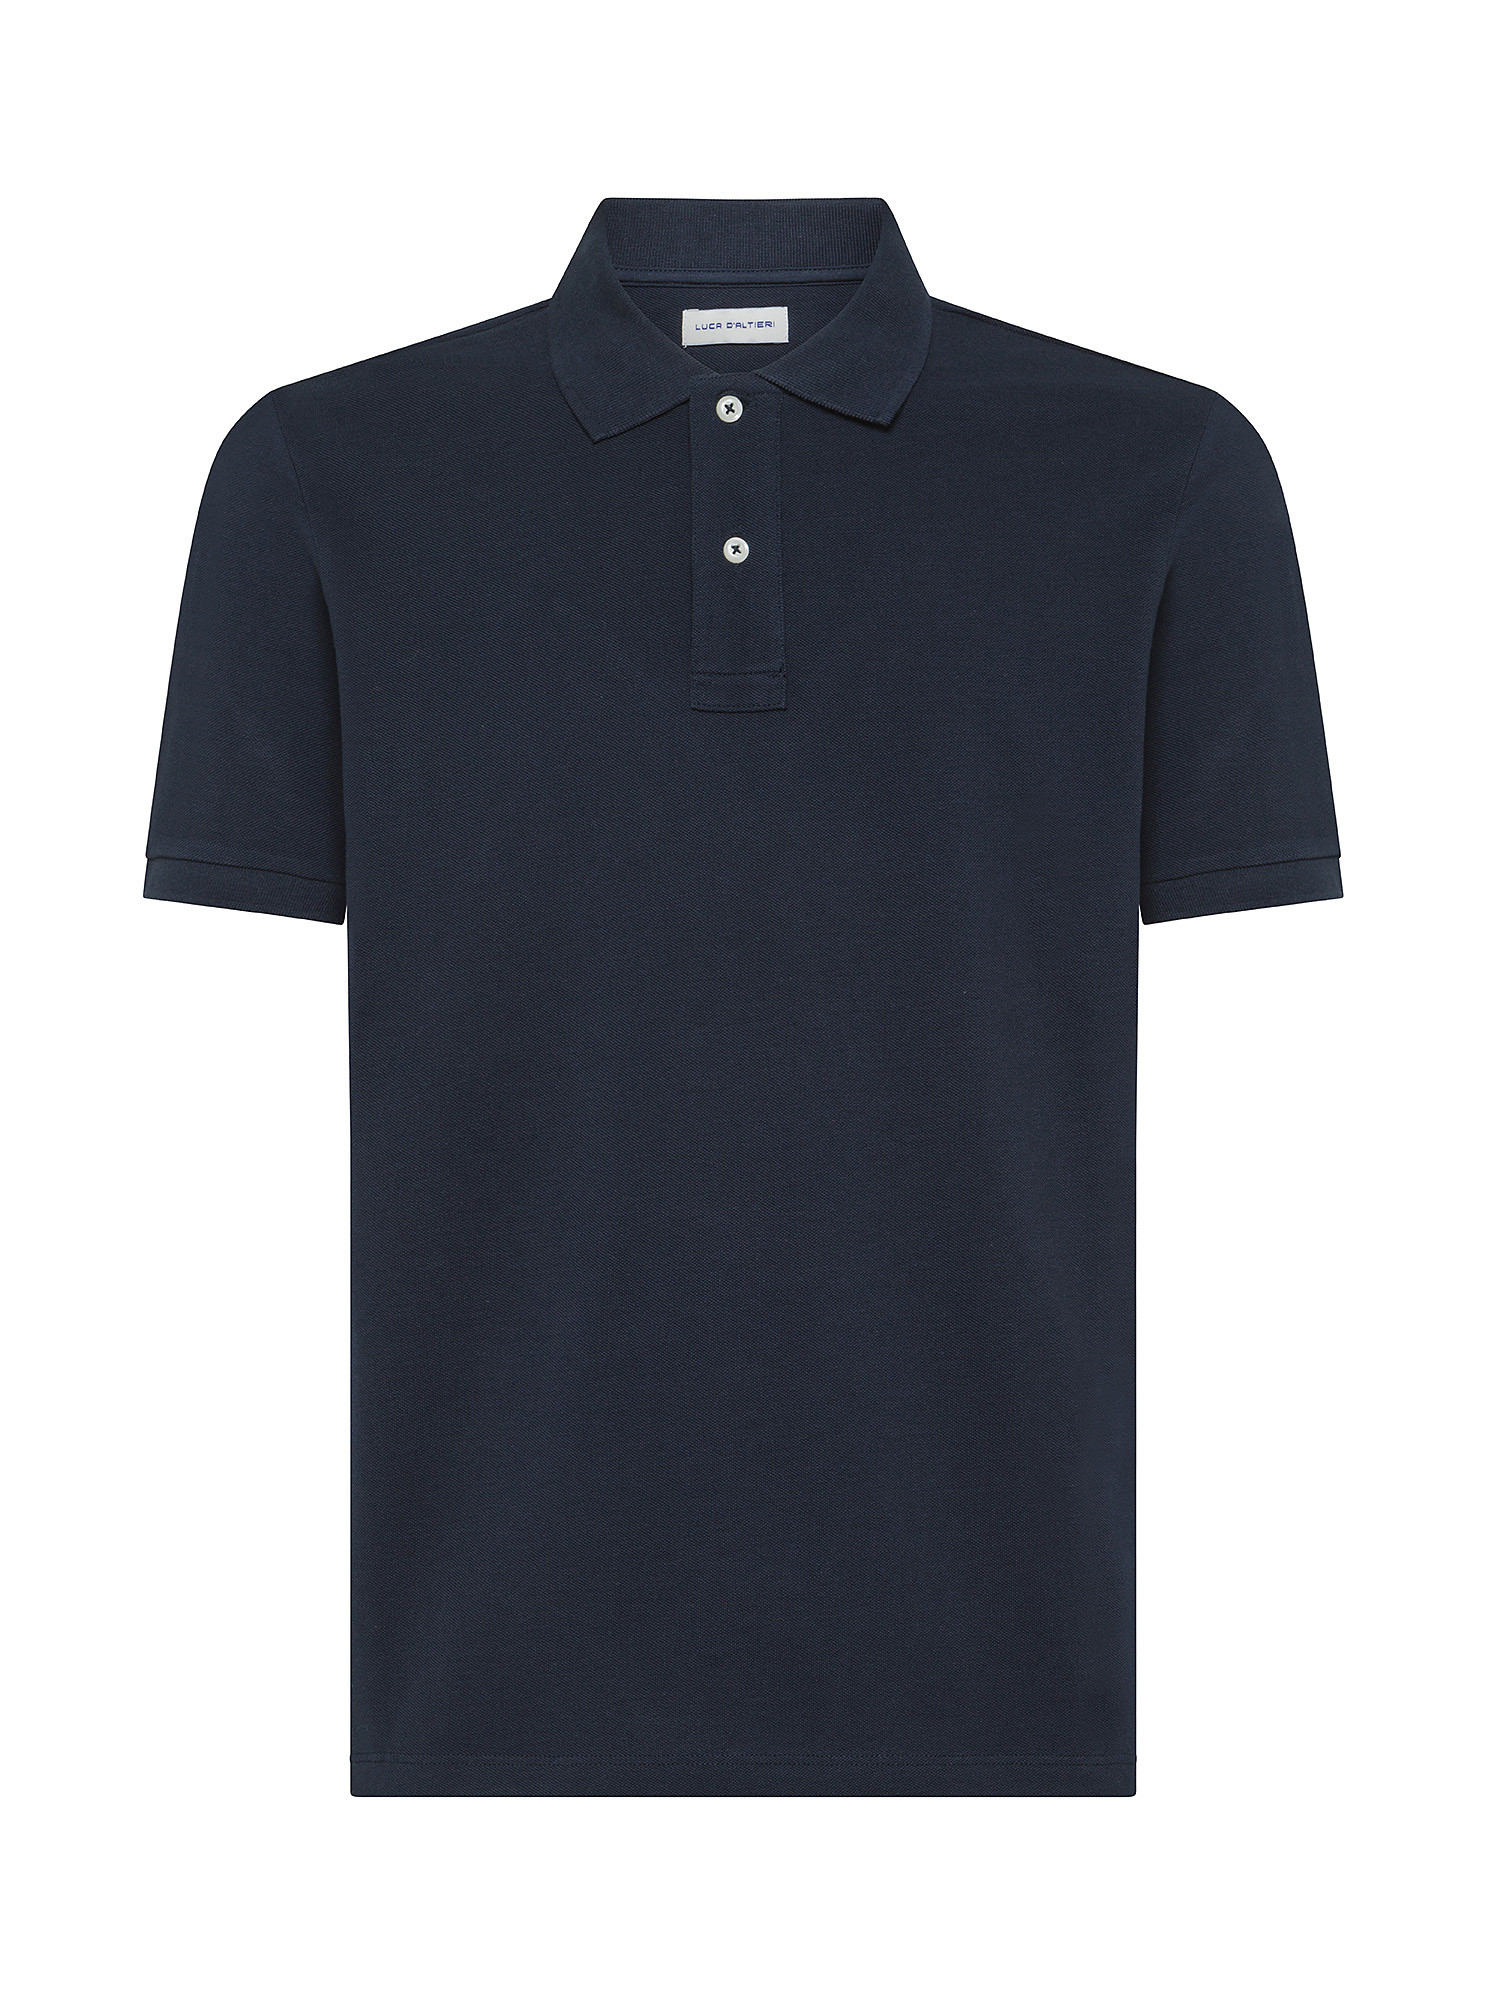 Luca D'Altieri - Polo in pure cotton, Dark Blue, large image number 0